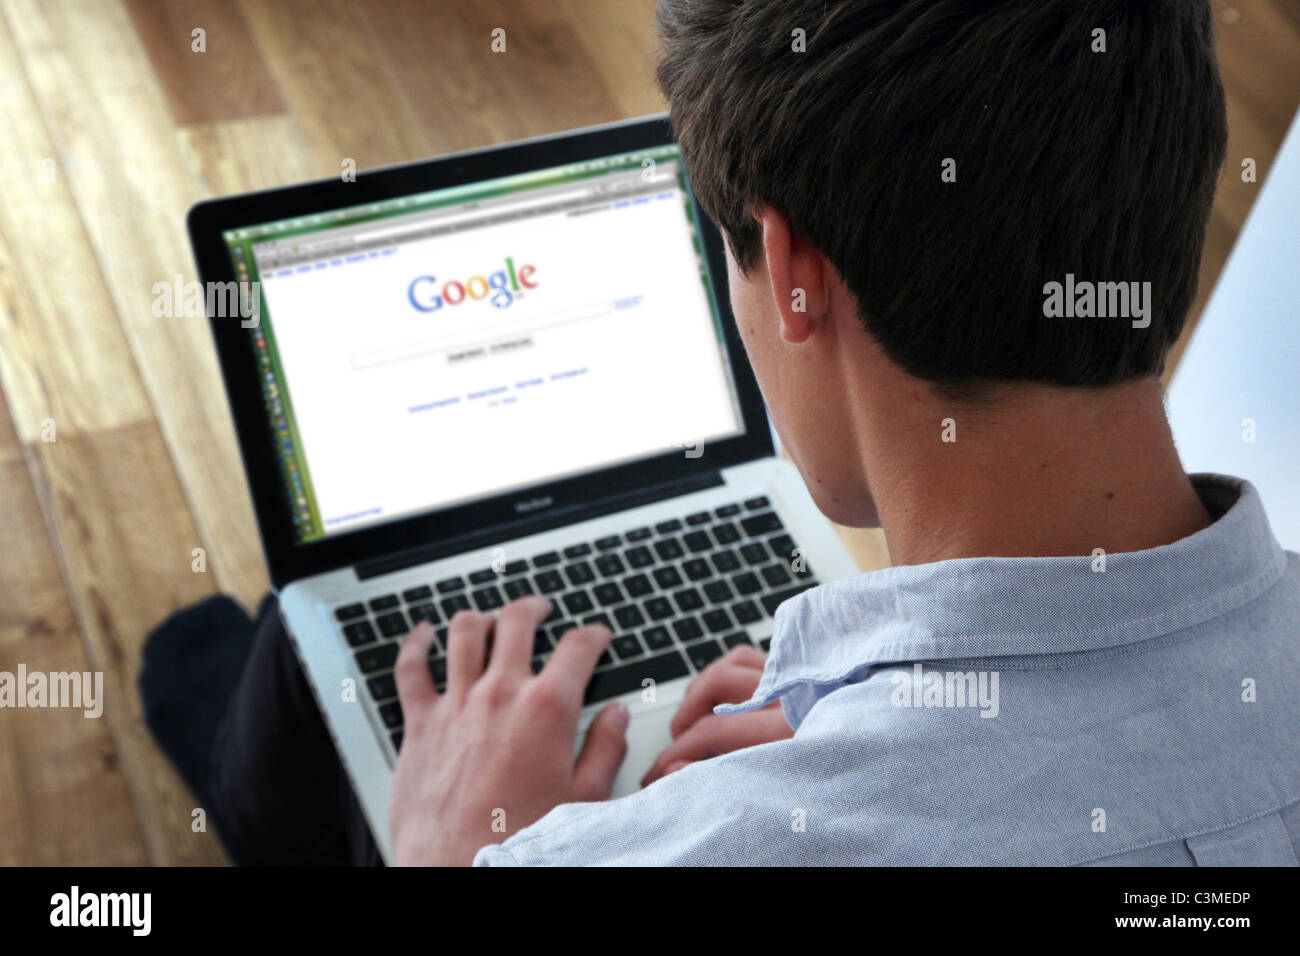 Young man using laptop on Google home page. Stock Photo